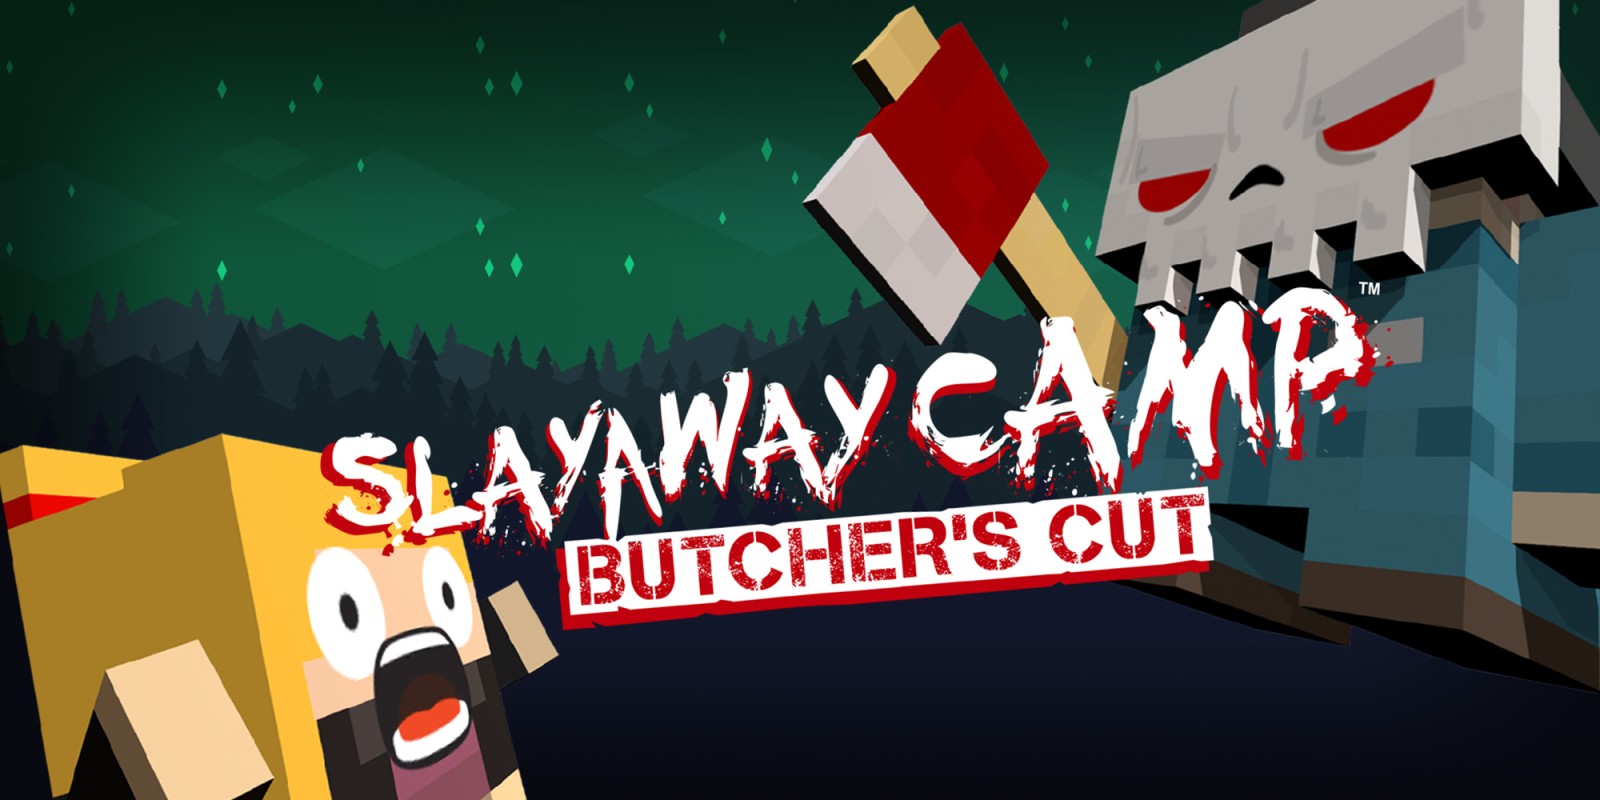 Slayaway Camp: Butcher’s Cut Is Set To Get A Physical Release Later In March 2020, Physical Copies For Nintendo Switch and PlayStation 4 From Physicality Games